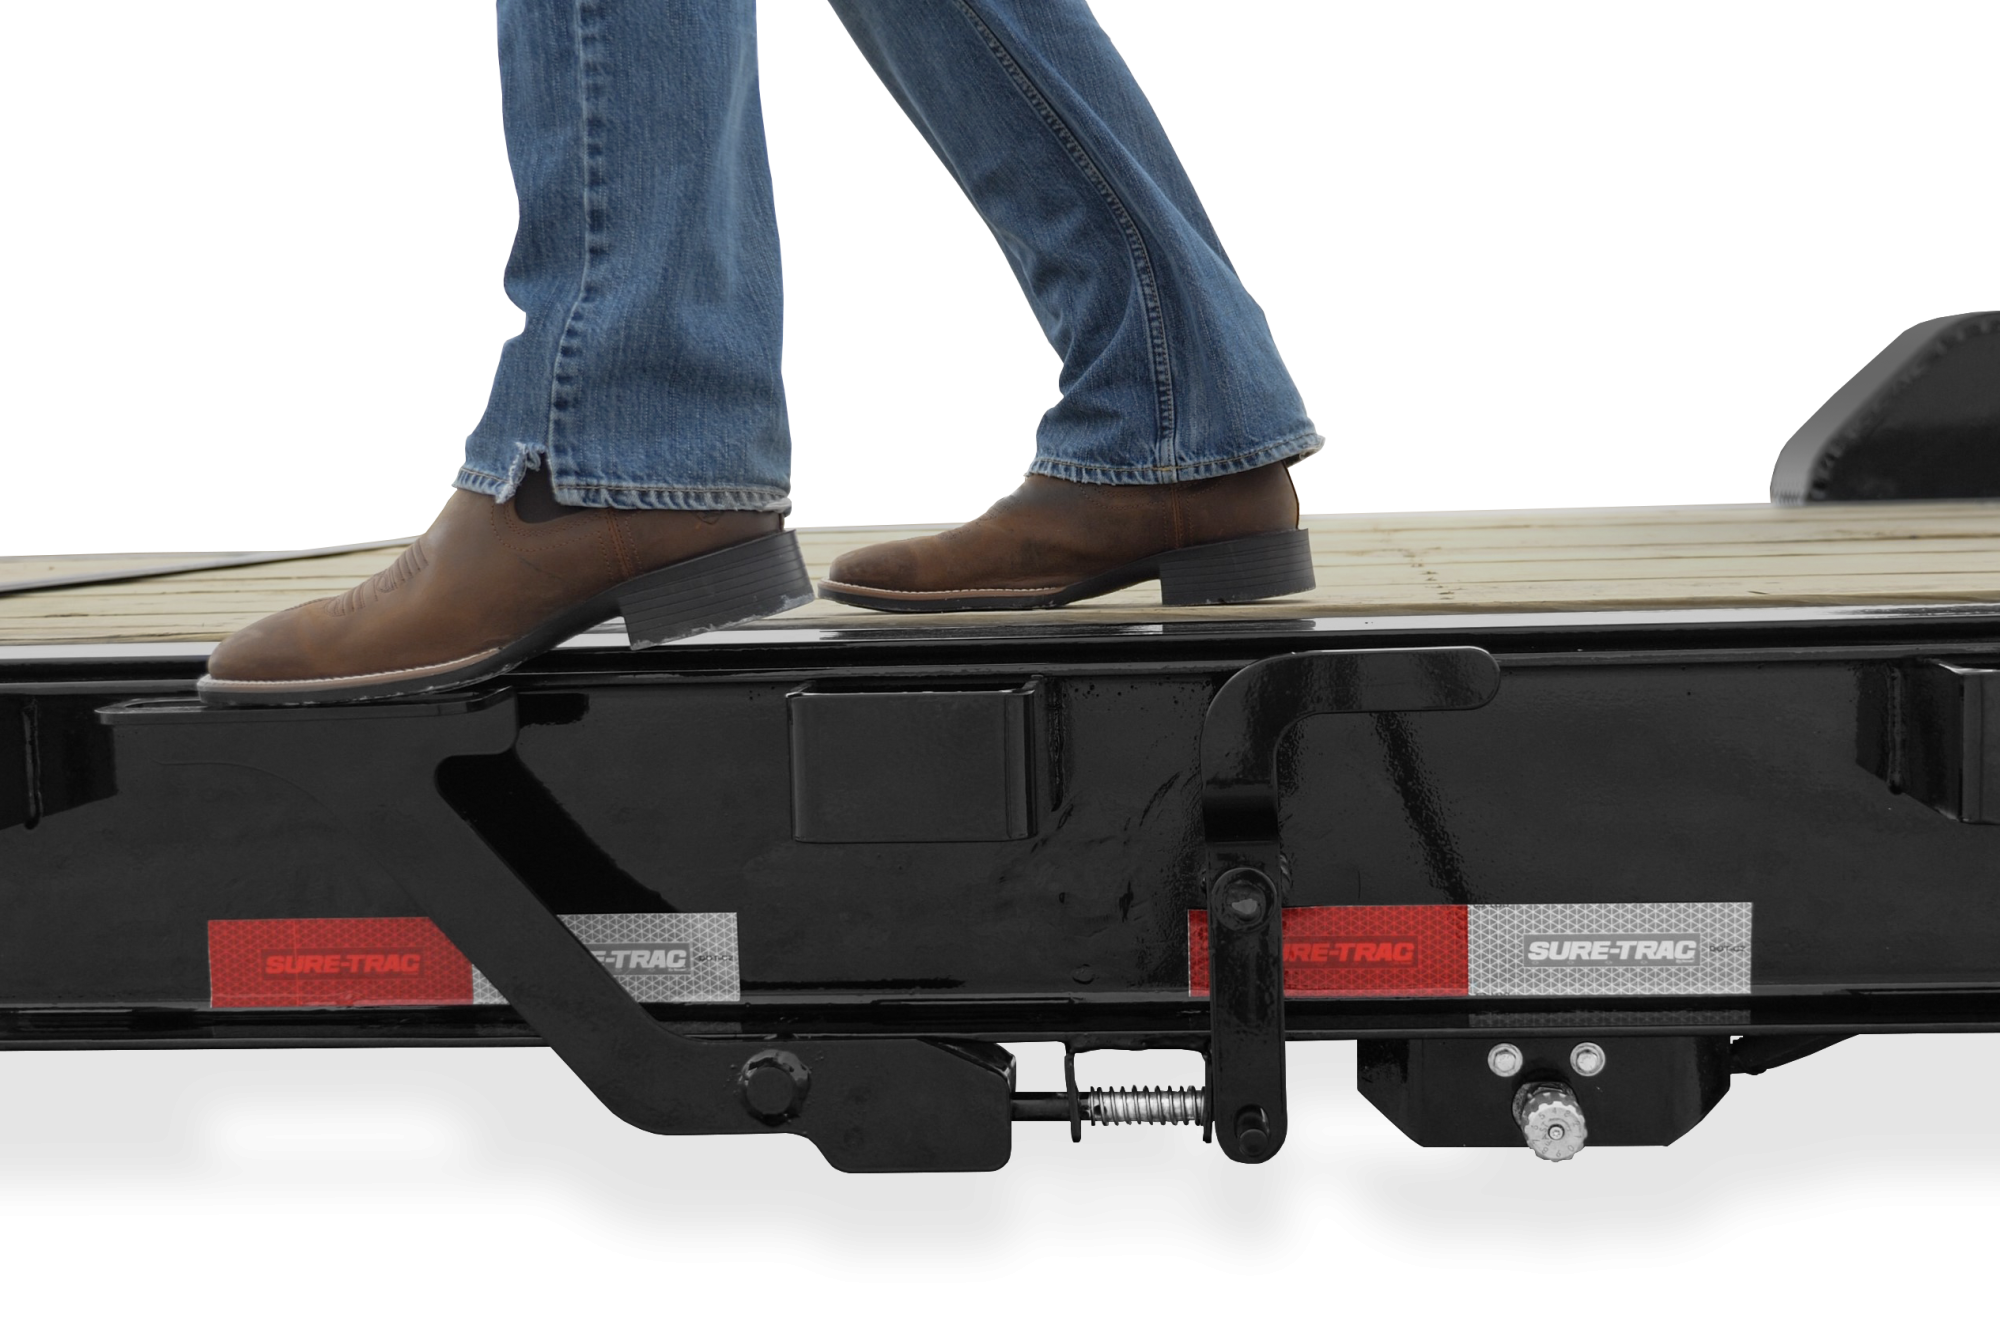 Sure-Trac | Pro Series tilt Bed Trailer | Image | Side view, straight, Pro Series Tilt Bed Trailer with reflective tape, close-up of step on latch